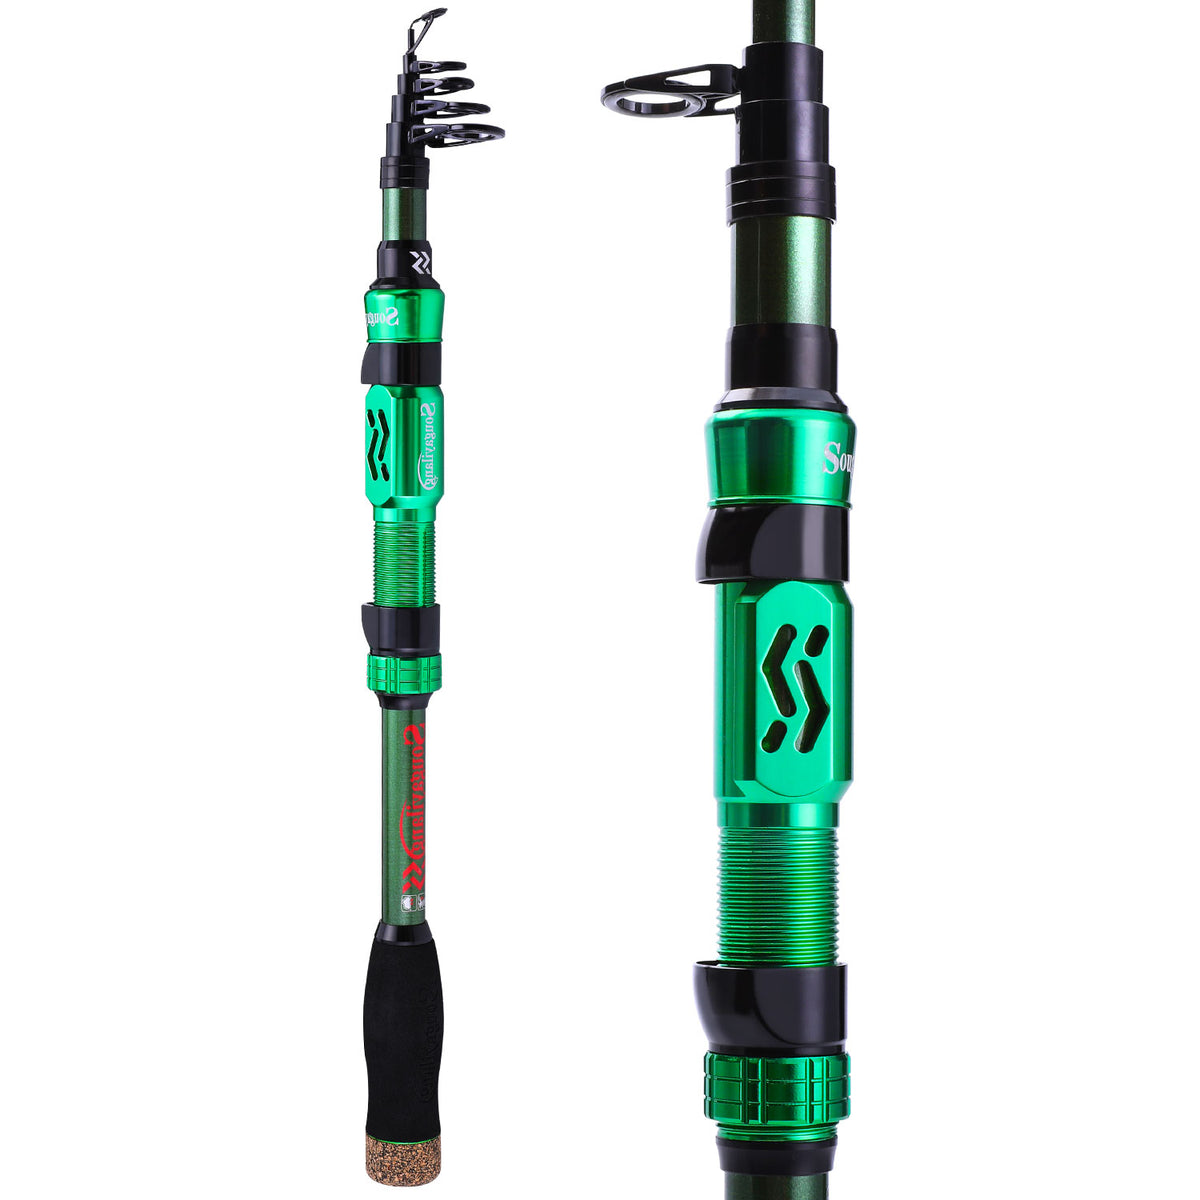  Fishing Rod - 24 Ton Carbon Fiber - Stainless Steel Hooded  Reel Seats - Aluminum Oxide Guide InsertsTelescopic Retractable Spinning  Pole For Saltwater Freshwater Fishing